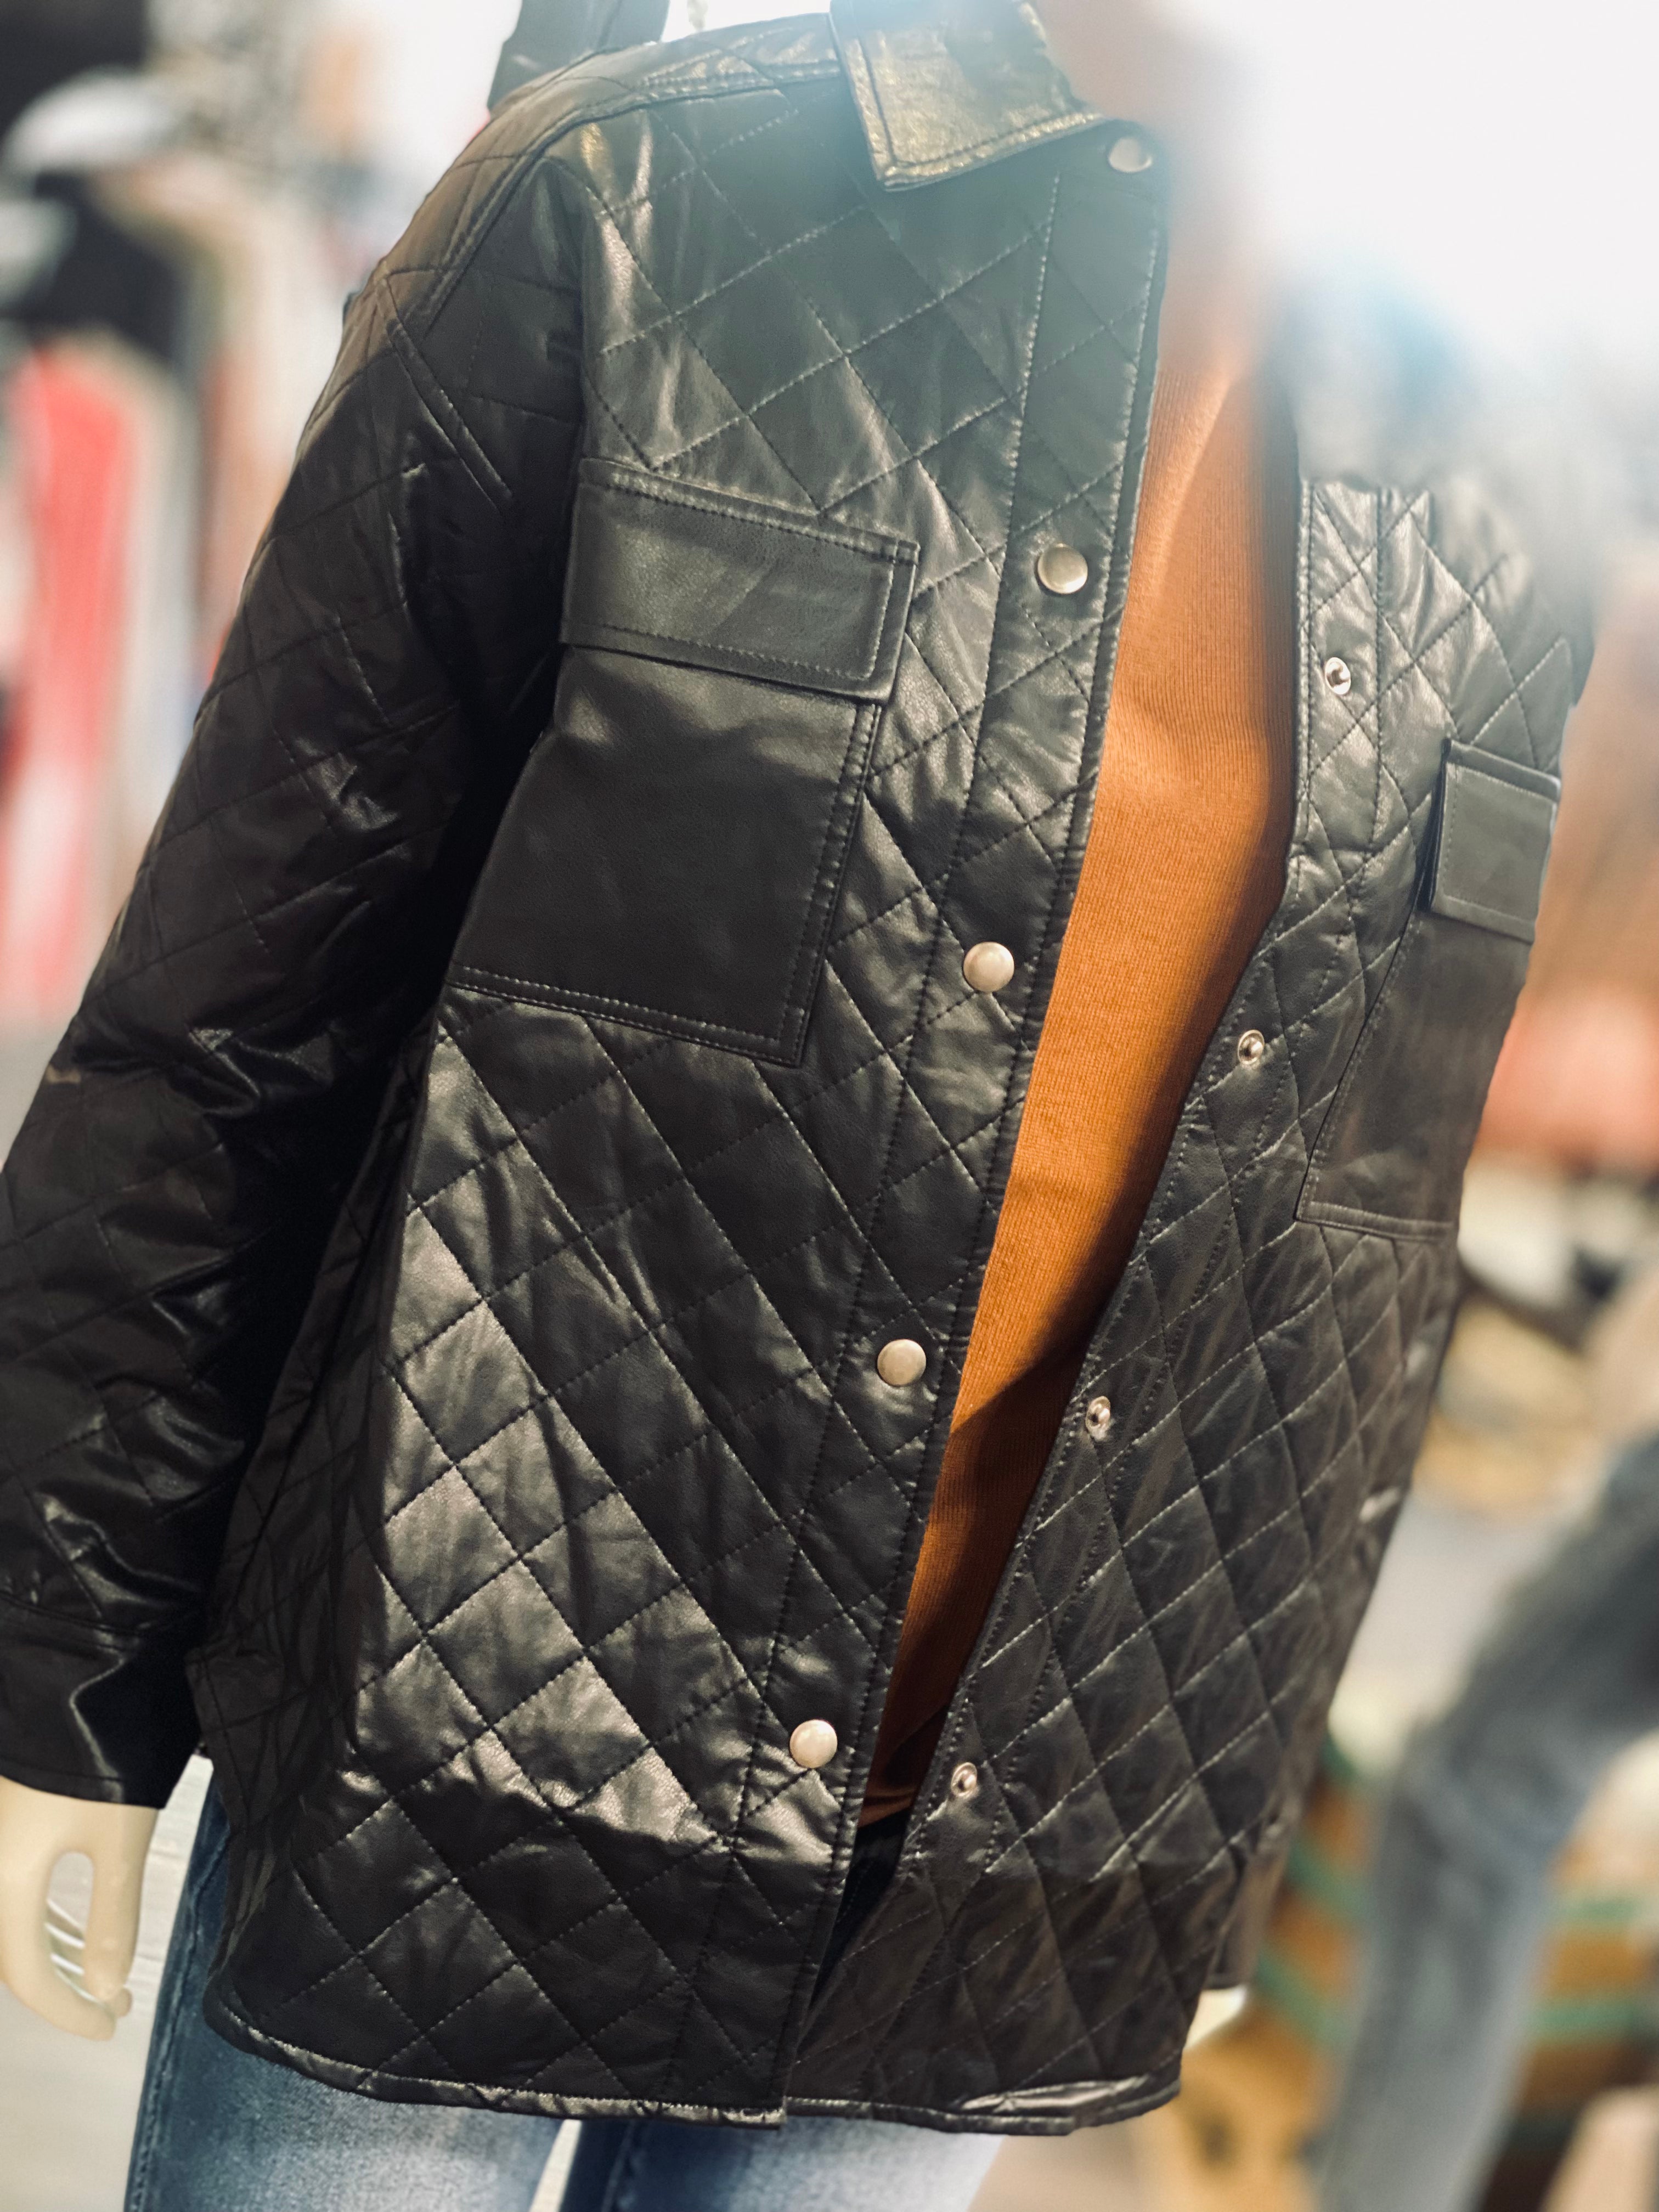 ODDi Diamond Quilted Black Leather Jacket w/Snap Closure and Breast Pockets